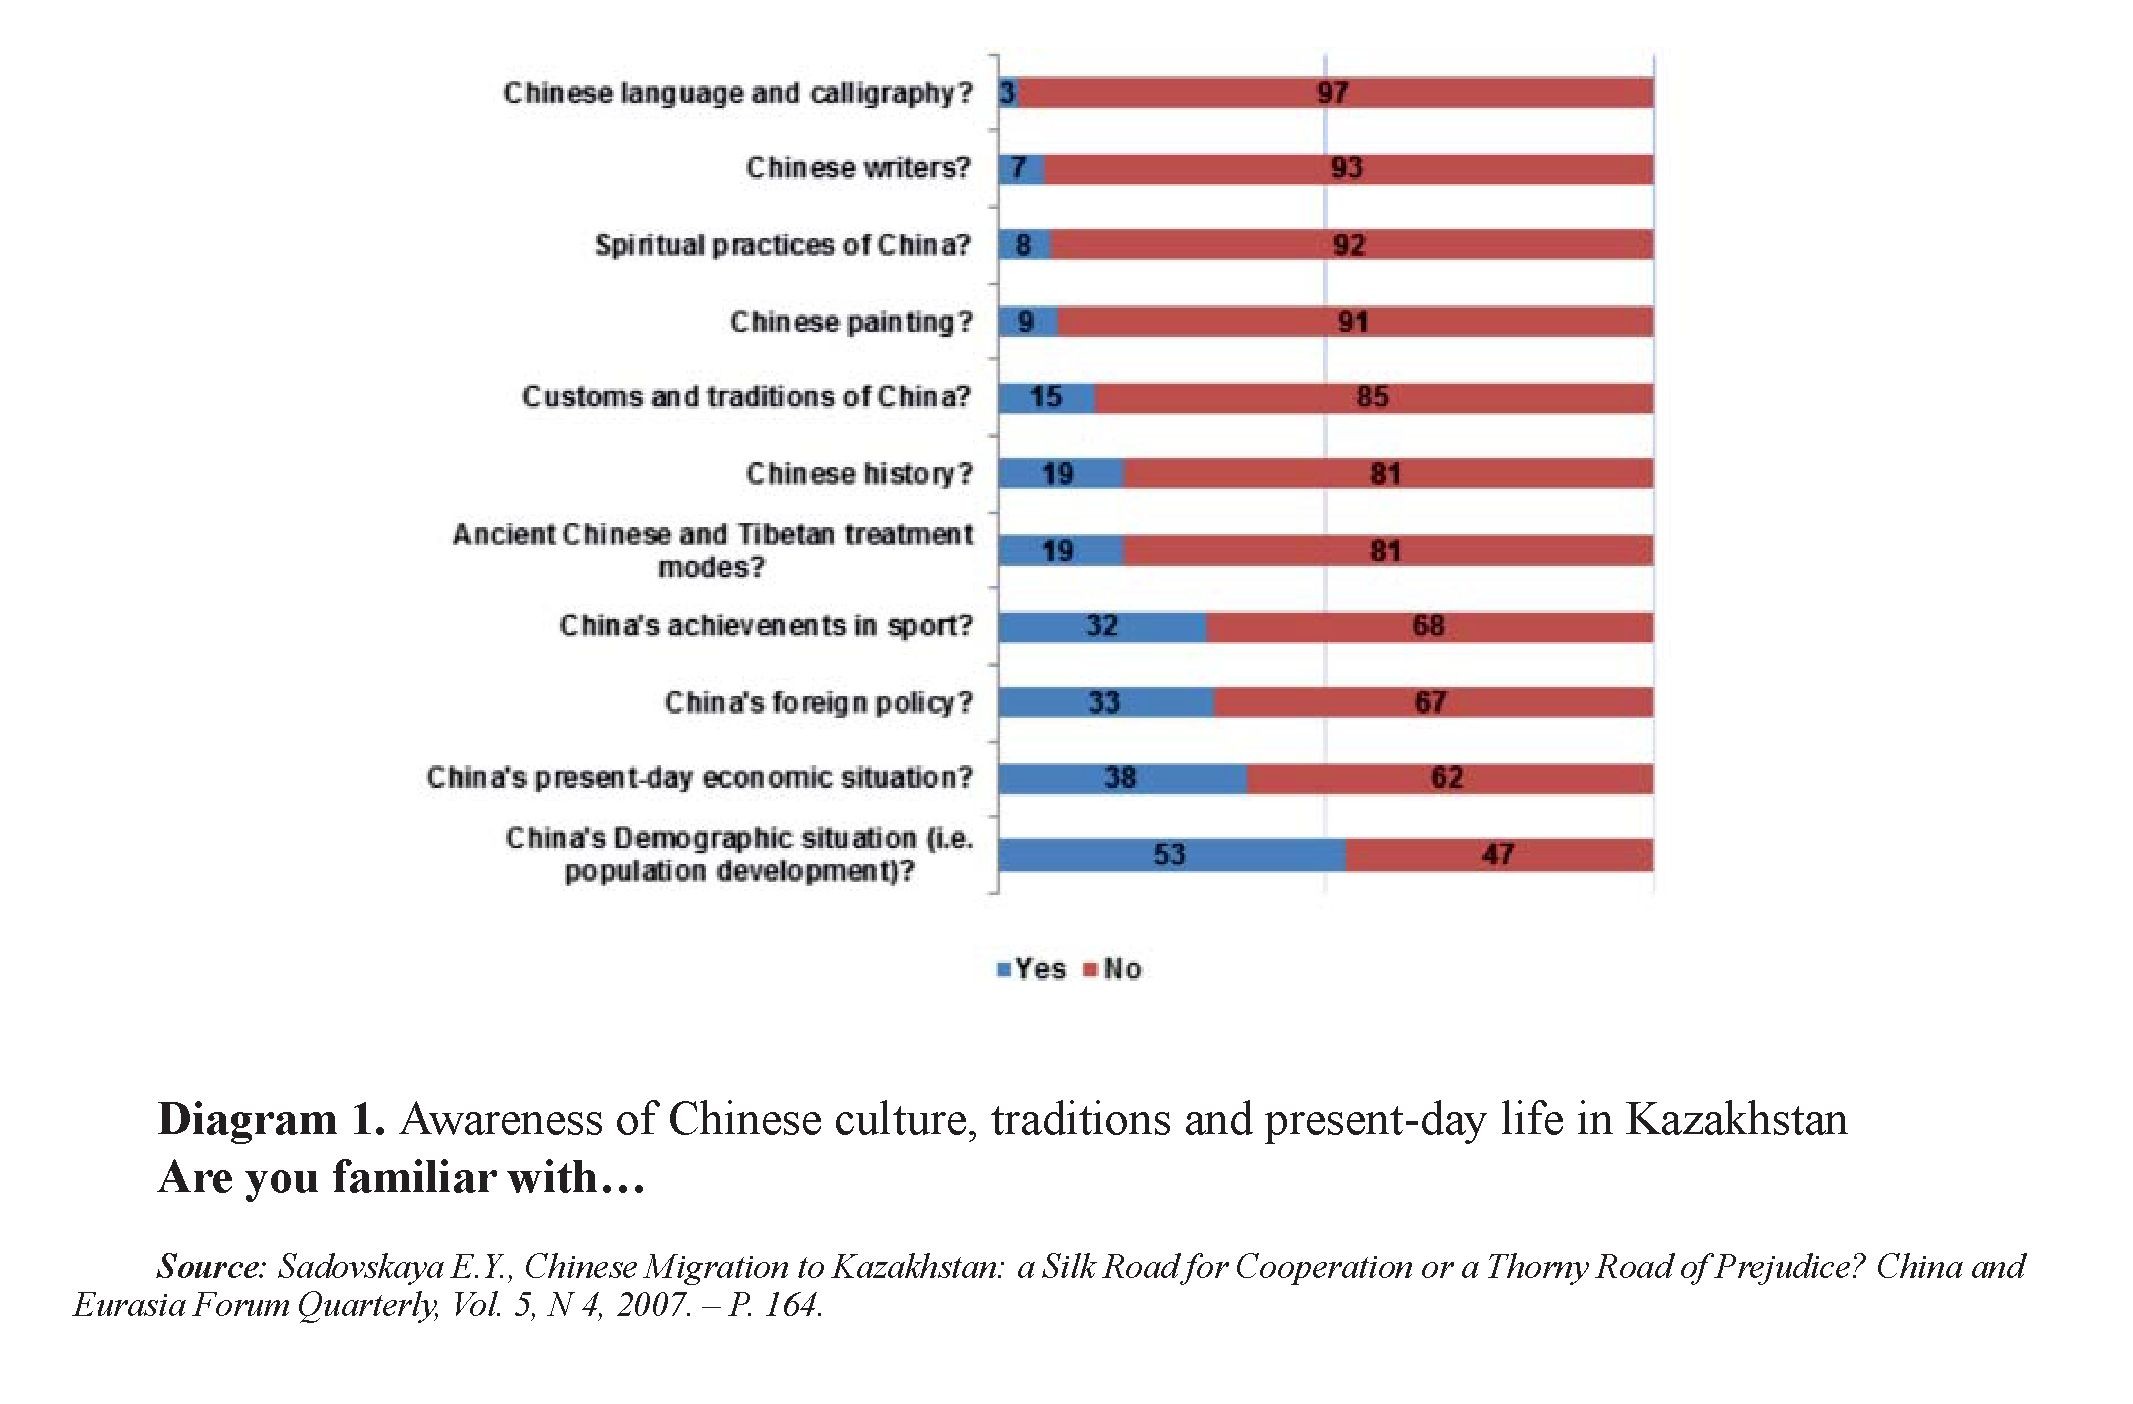 The Task of Winning Hearts and Minds Abroad: Chinese Public Diplomacy in Kazakhstan